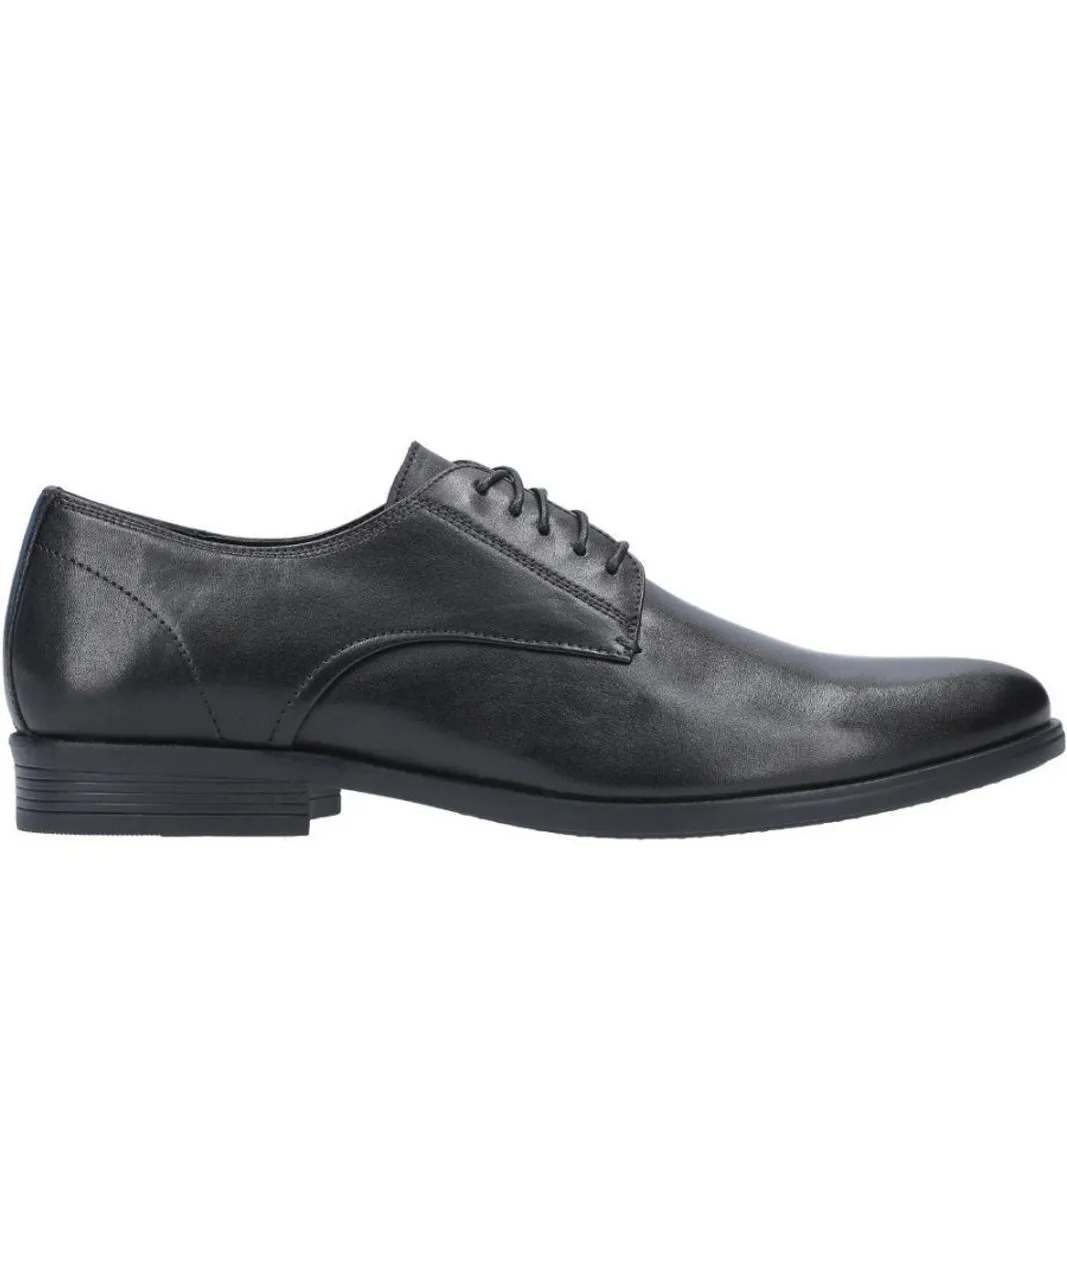 Hush Puppies Mens Oscar Light Lace Up Leather Oxford Shoes - Black